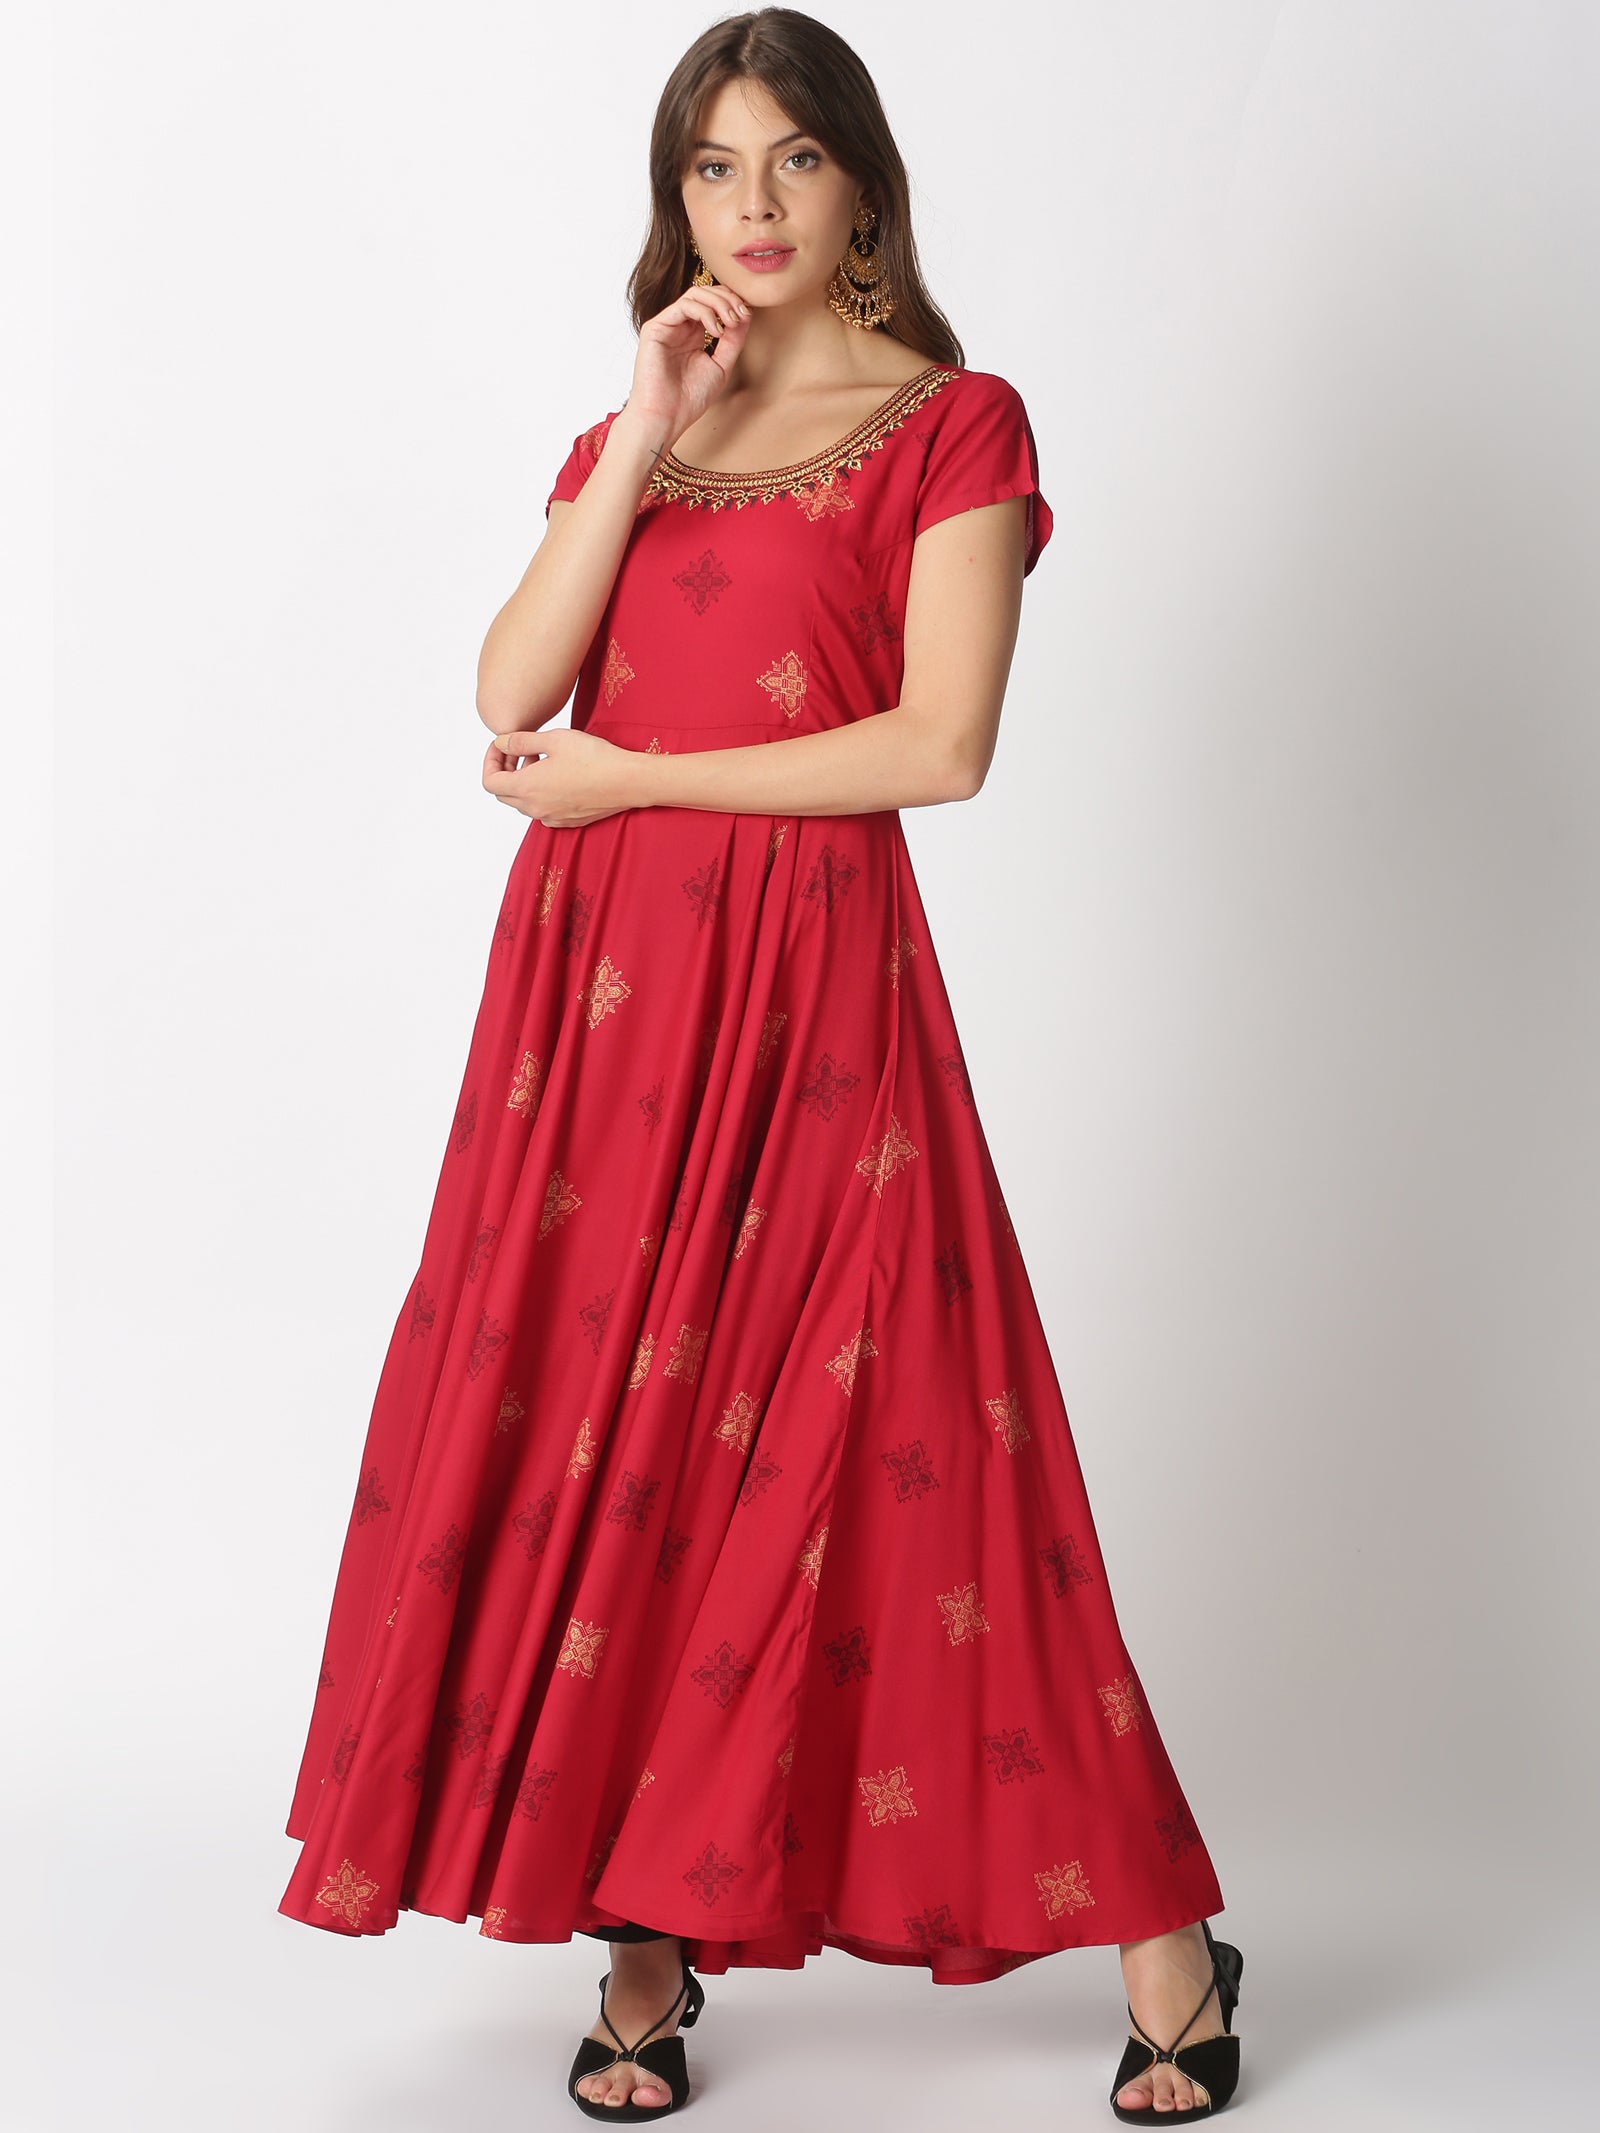 Red Ethnic Motifs Printed Anarkali Kurta with Embroidered Neck